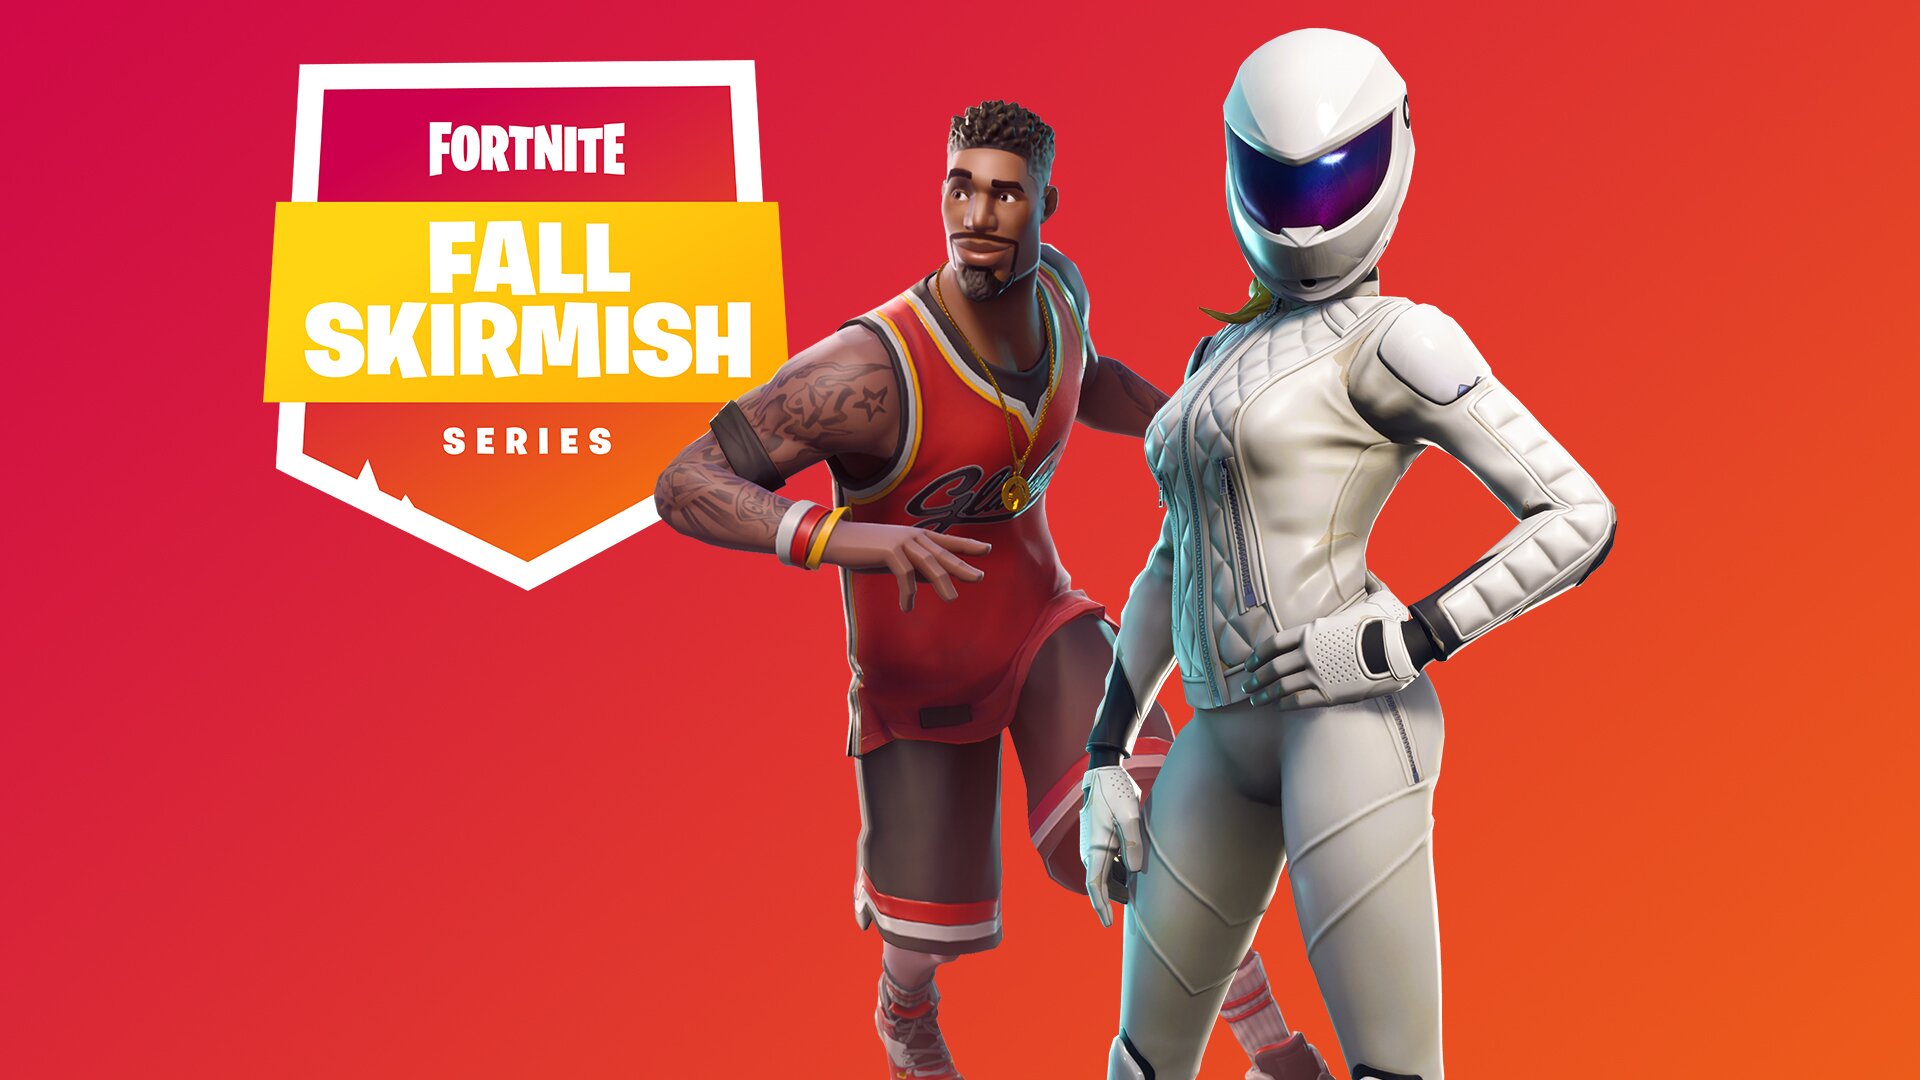 Fortnite’s next competitive competition, cleverly named the Fall Skirmish, will begin this Friday, September 21.